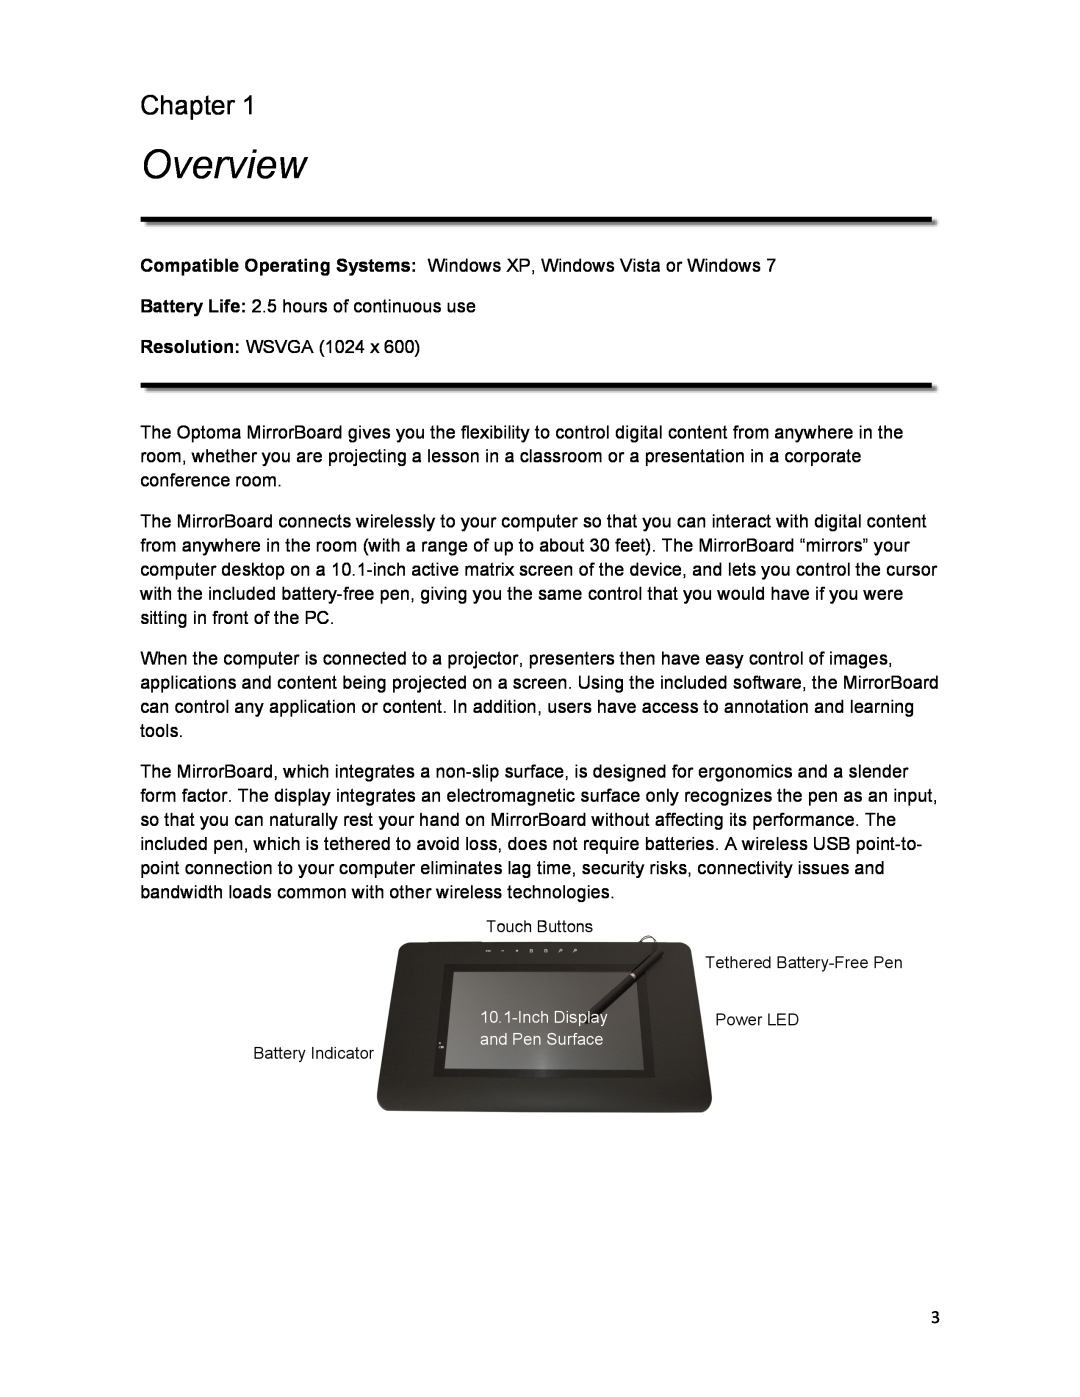 Optoma Technology Q300 manual Chapter, Overview 